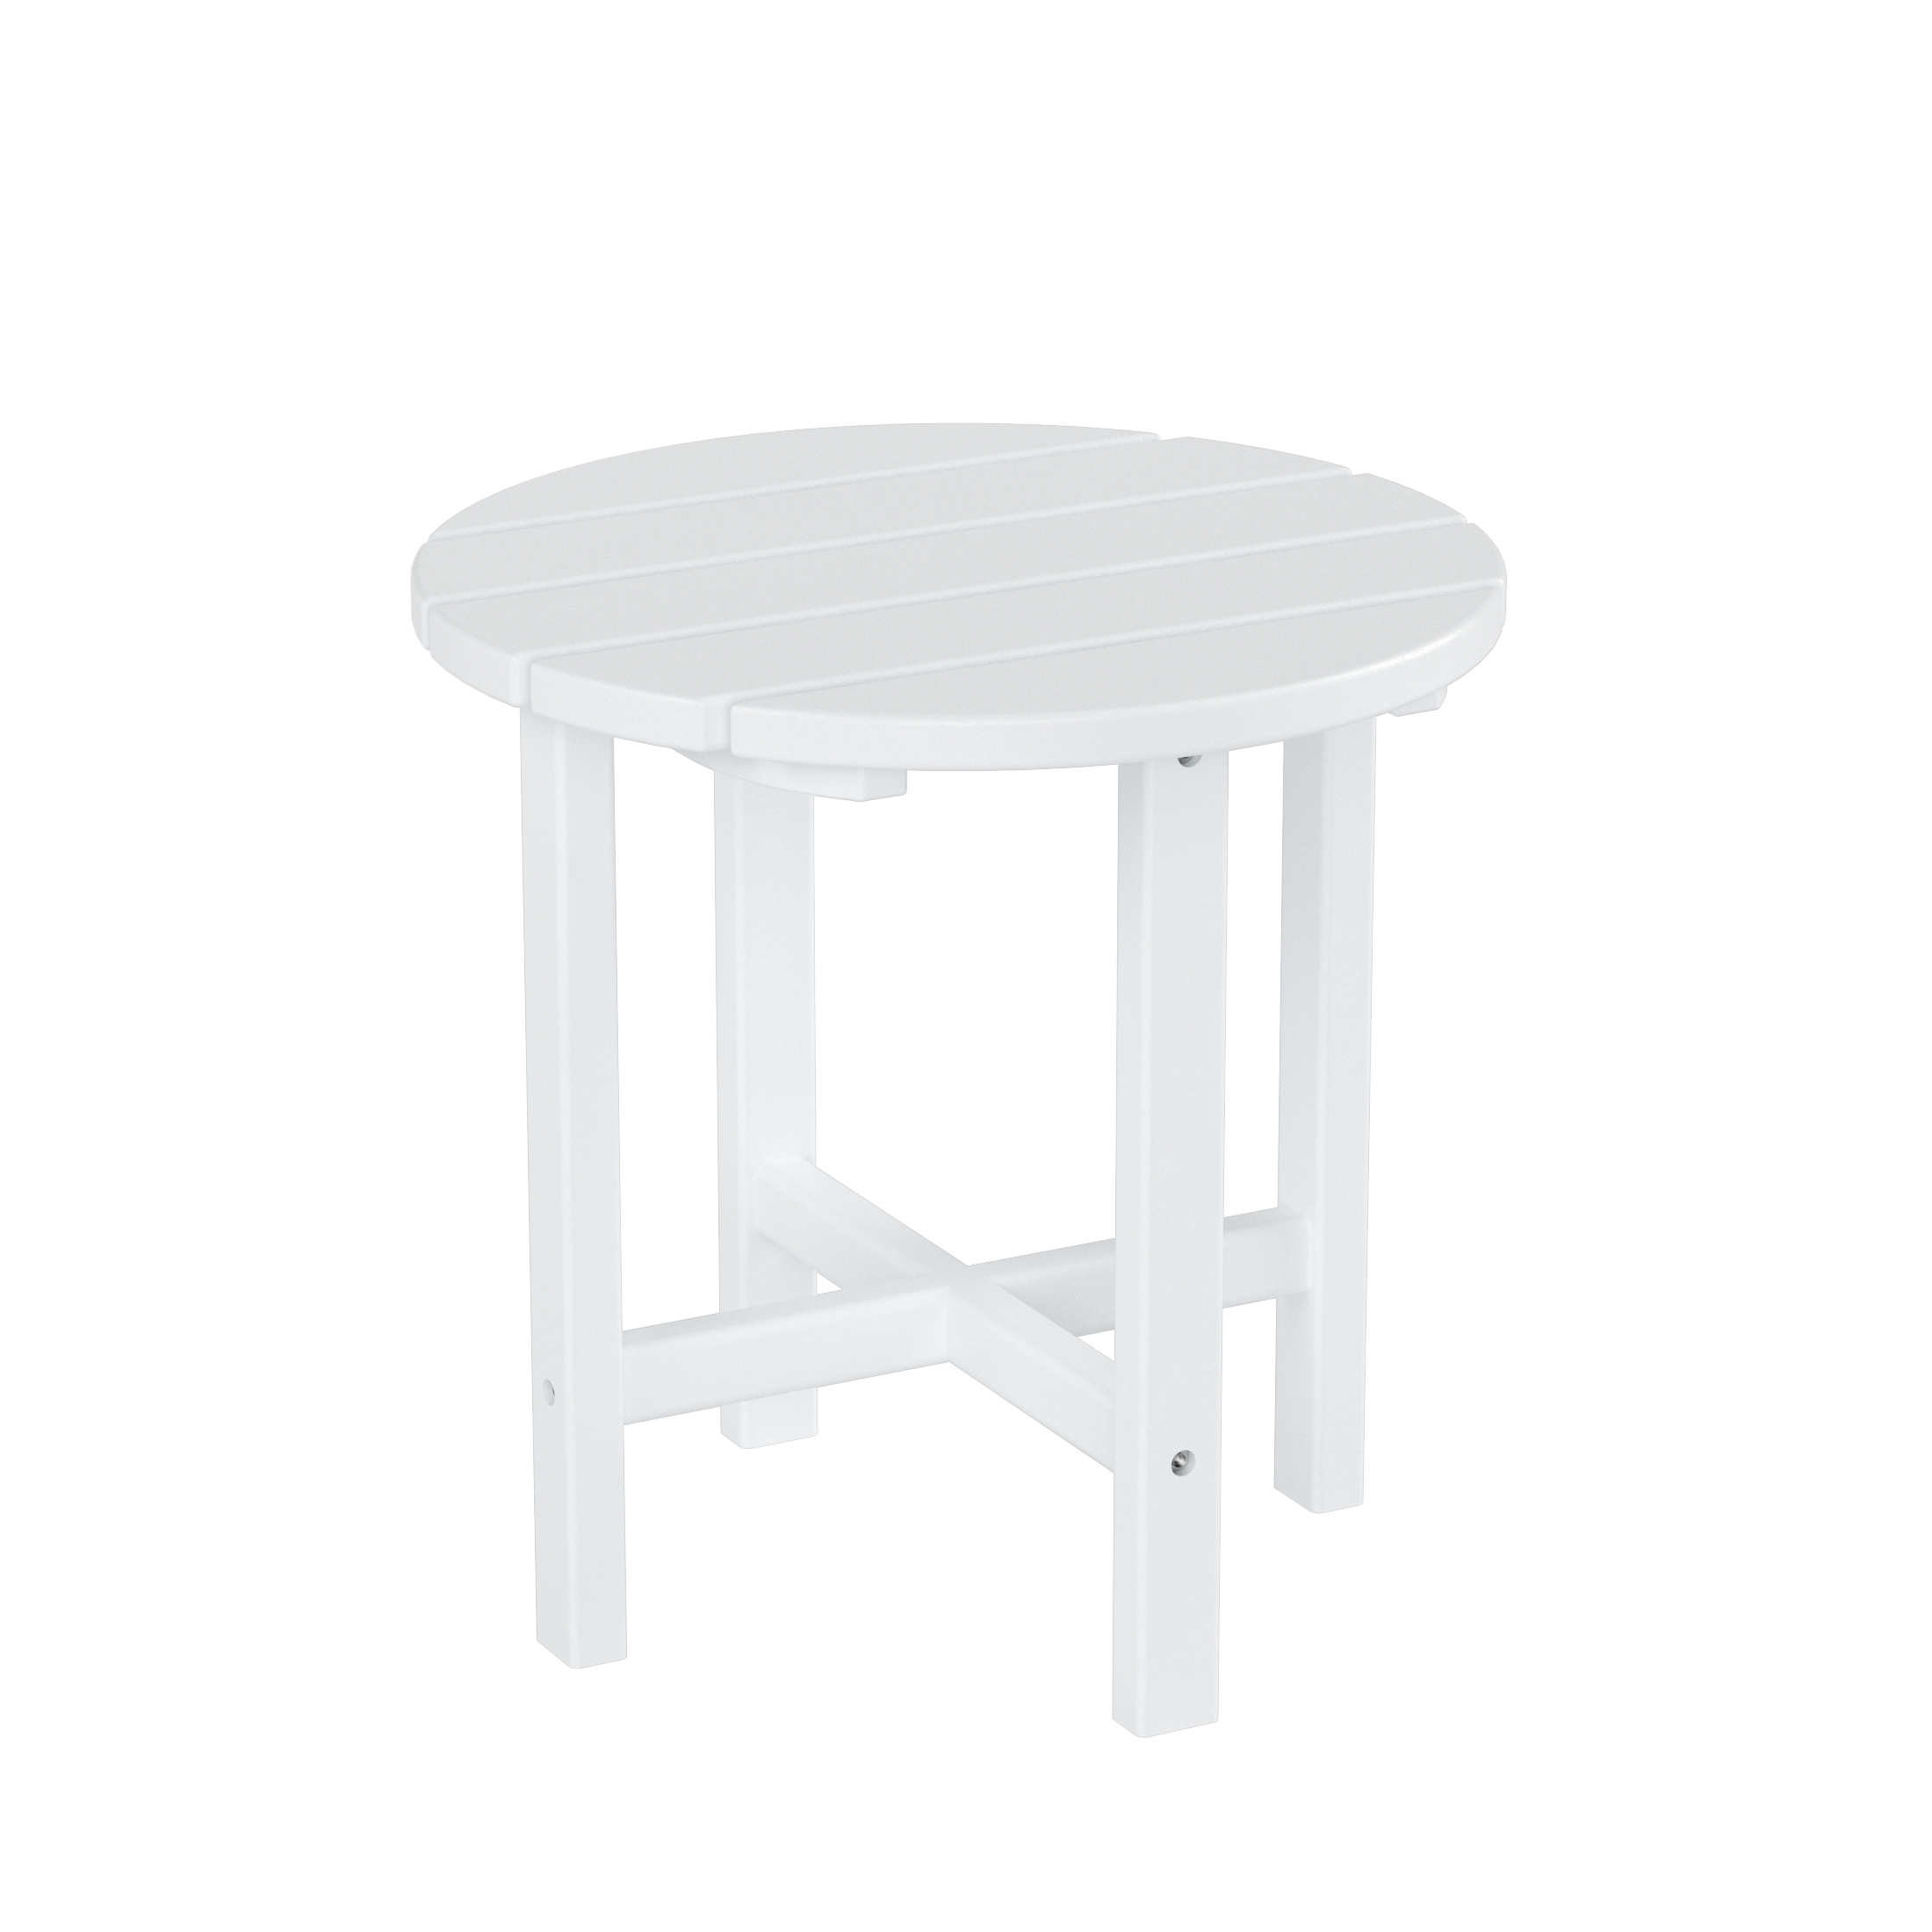 Westin Outdoor with Side Table HDPE Plastic Adirondack Chair - White (Set of 2) - image 5 of 5